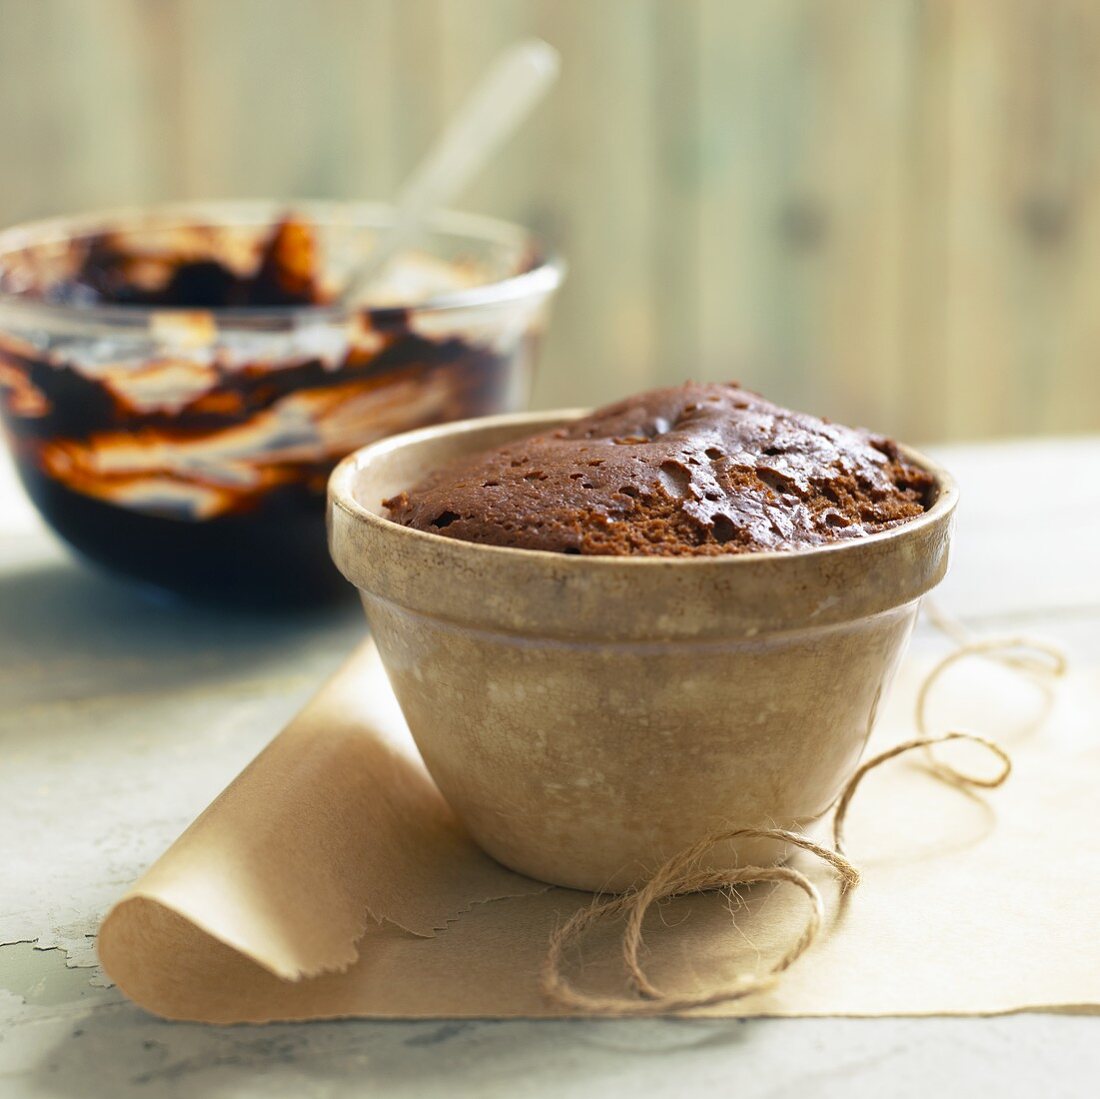 Chocolate pudding in pudding basin